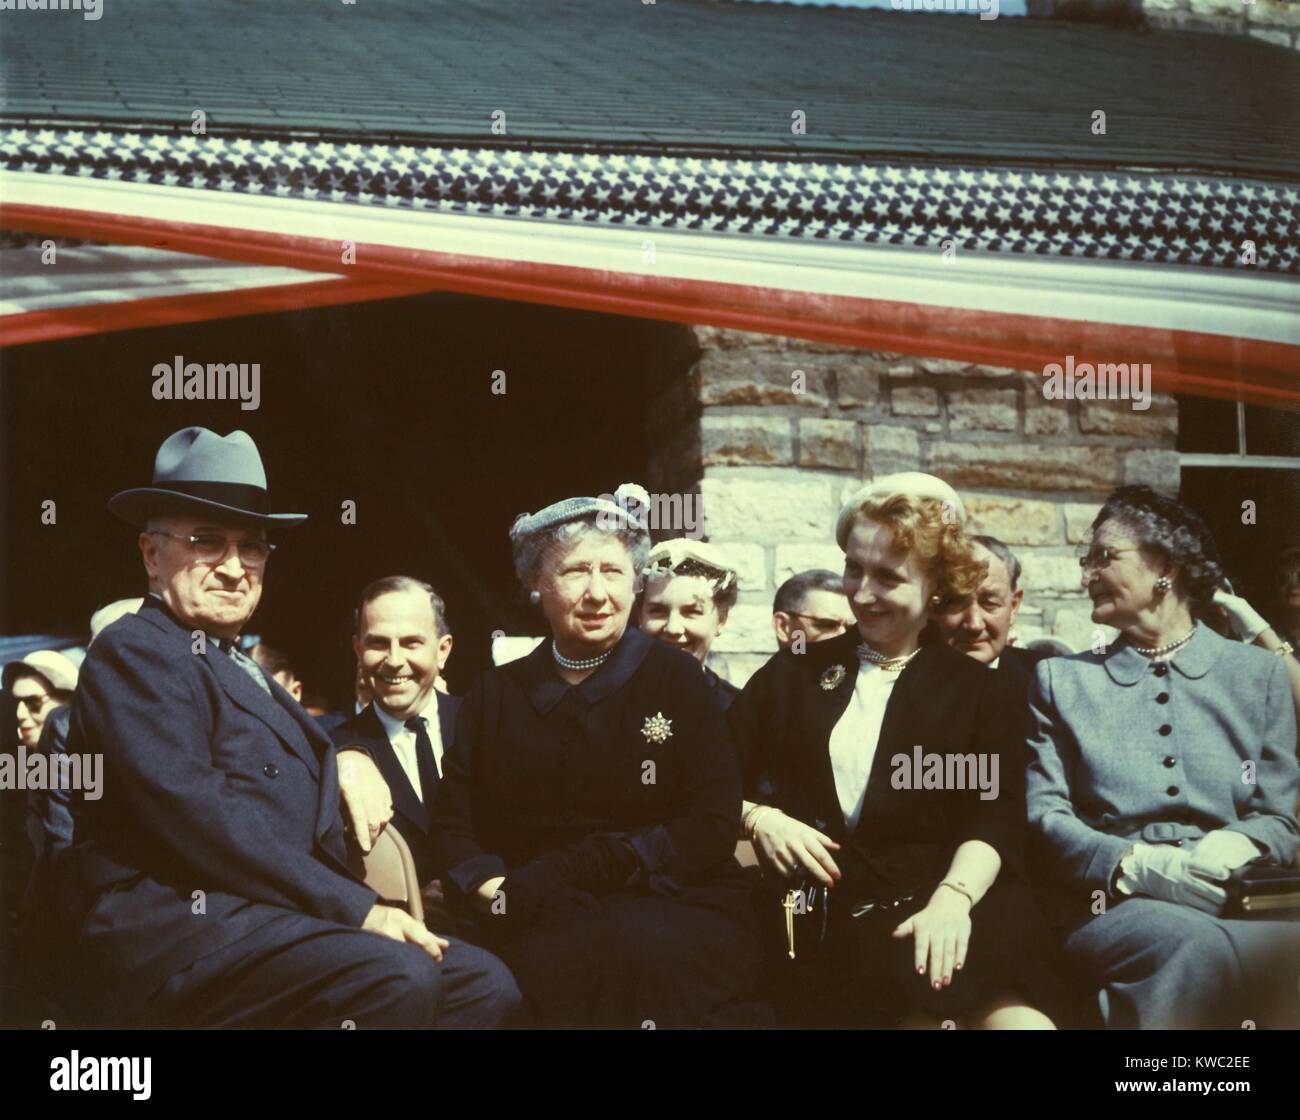 Truman Presidential Library Ground Breaking, May 8, 1955. L-R: Former President Harry Truman, Bess Truman, and Margaret Truman. (BSLOC 2015 2 240) Stock Photo